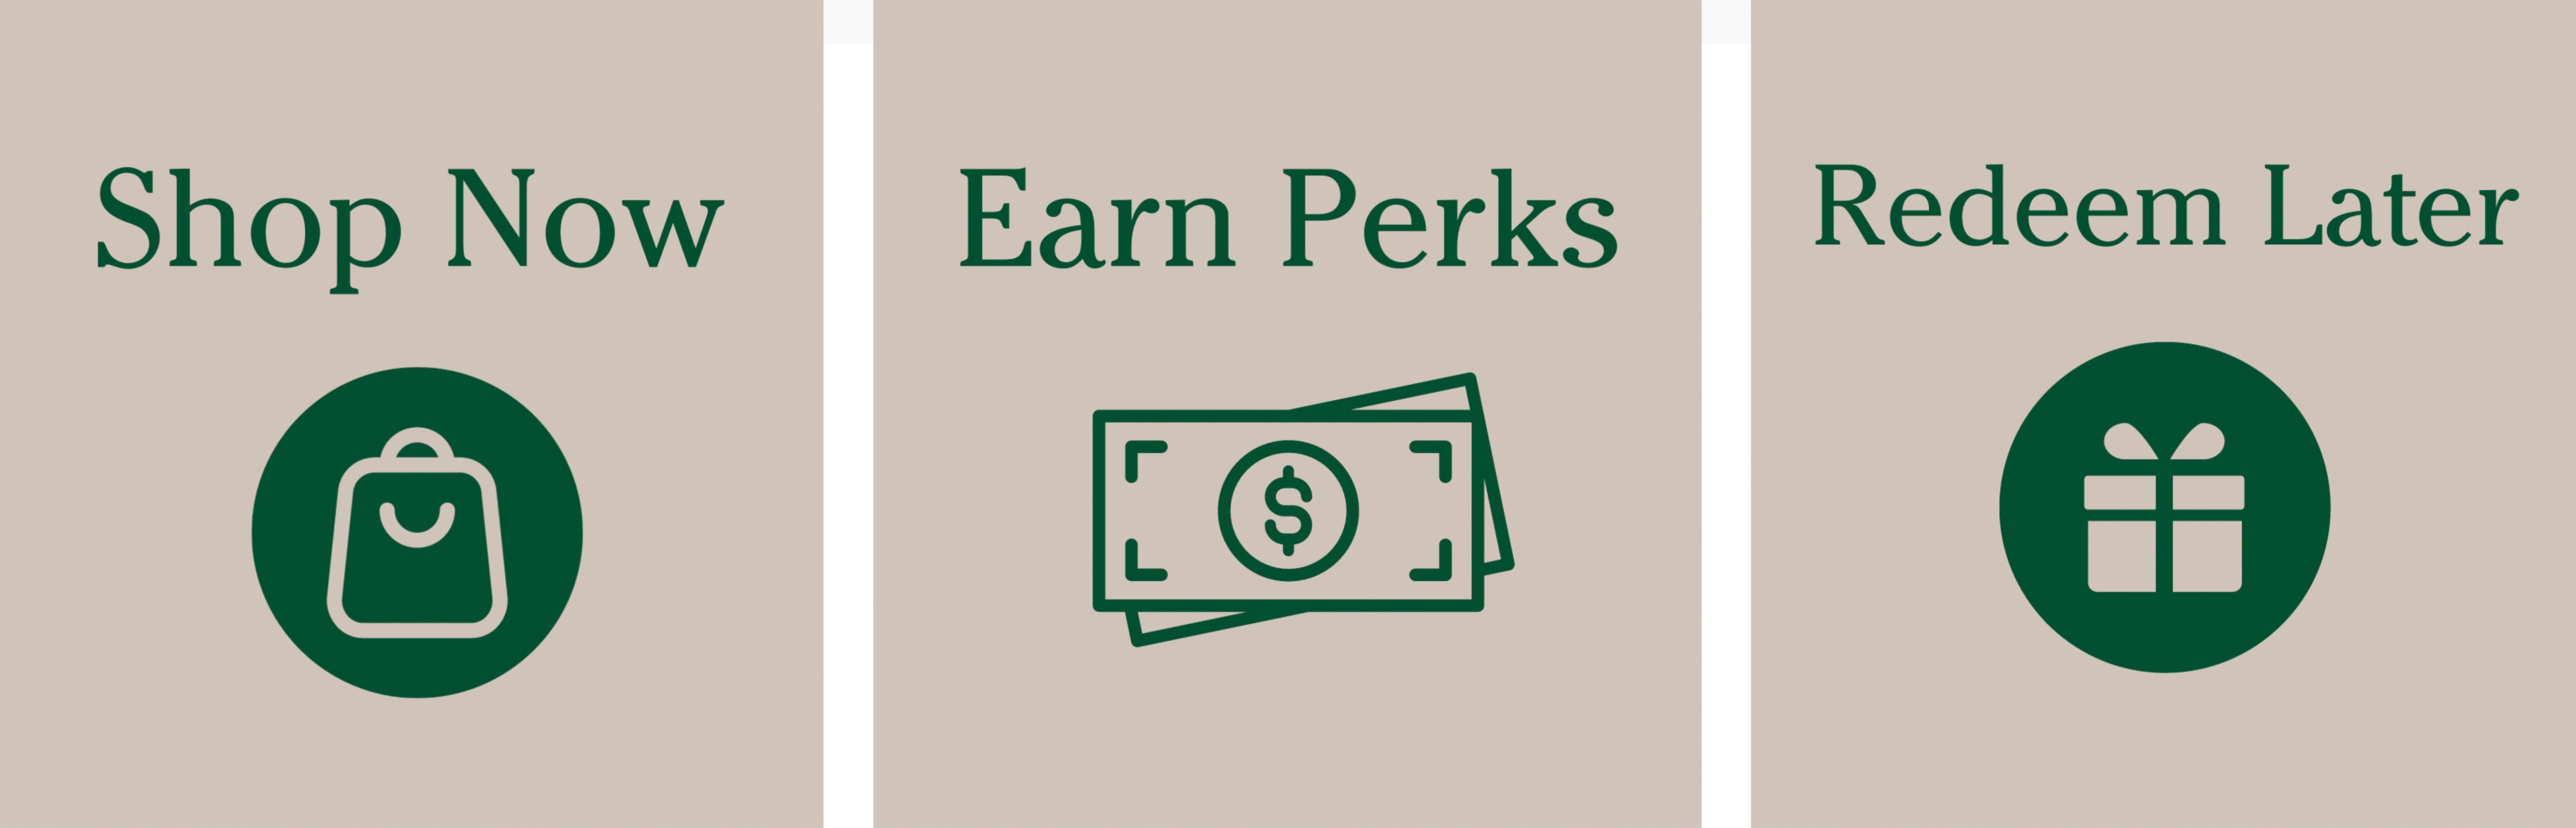 Plow Perks: Shop Now, Earn Perks, Redeem Later